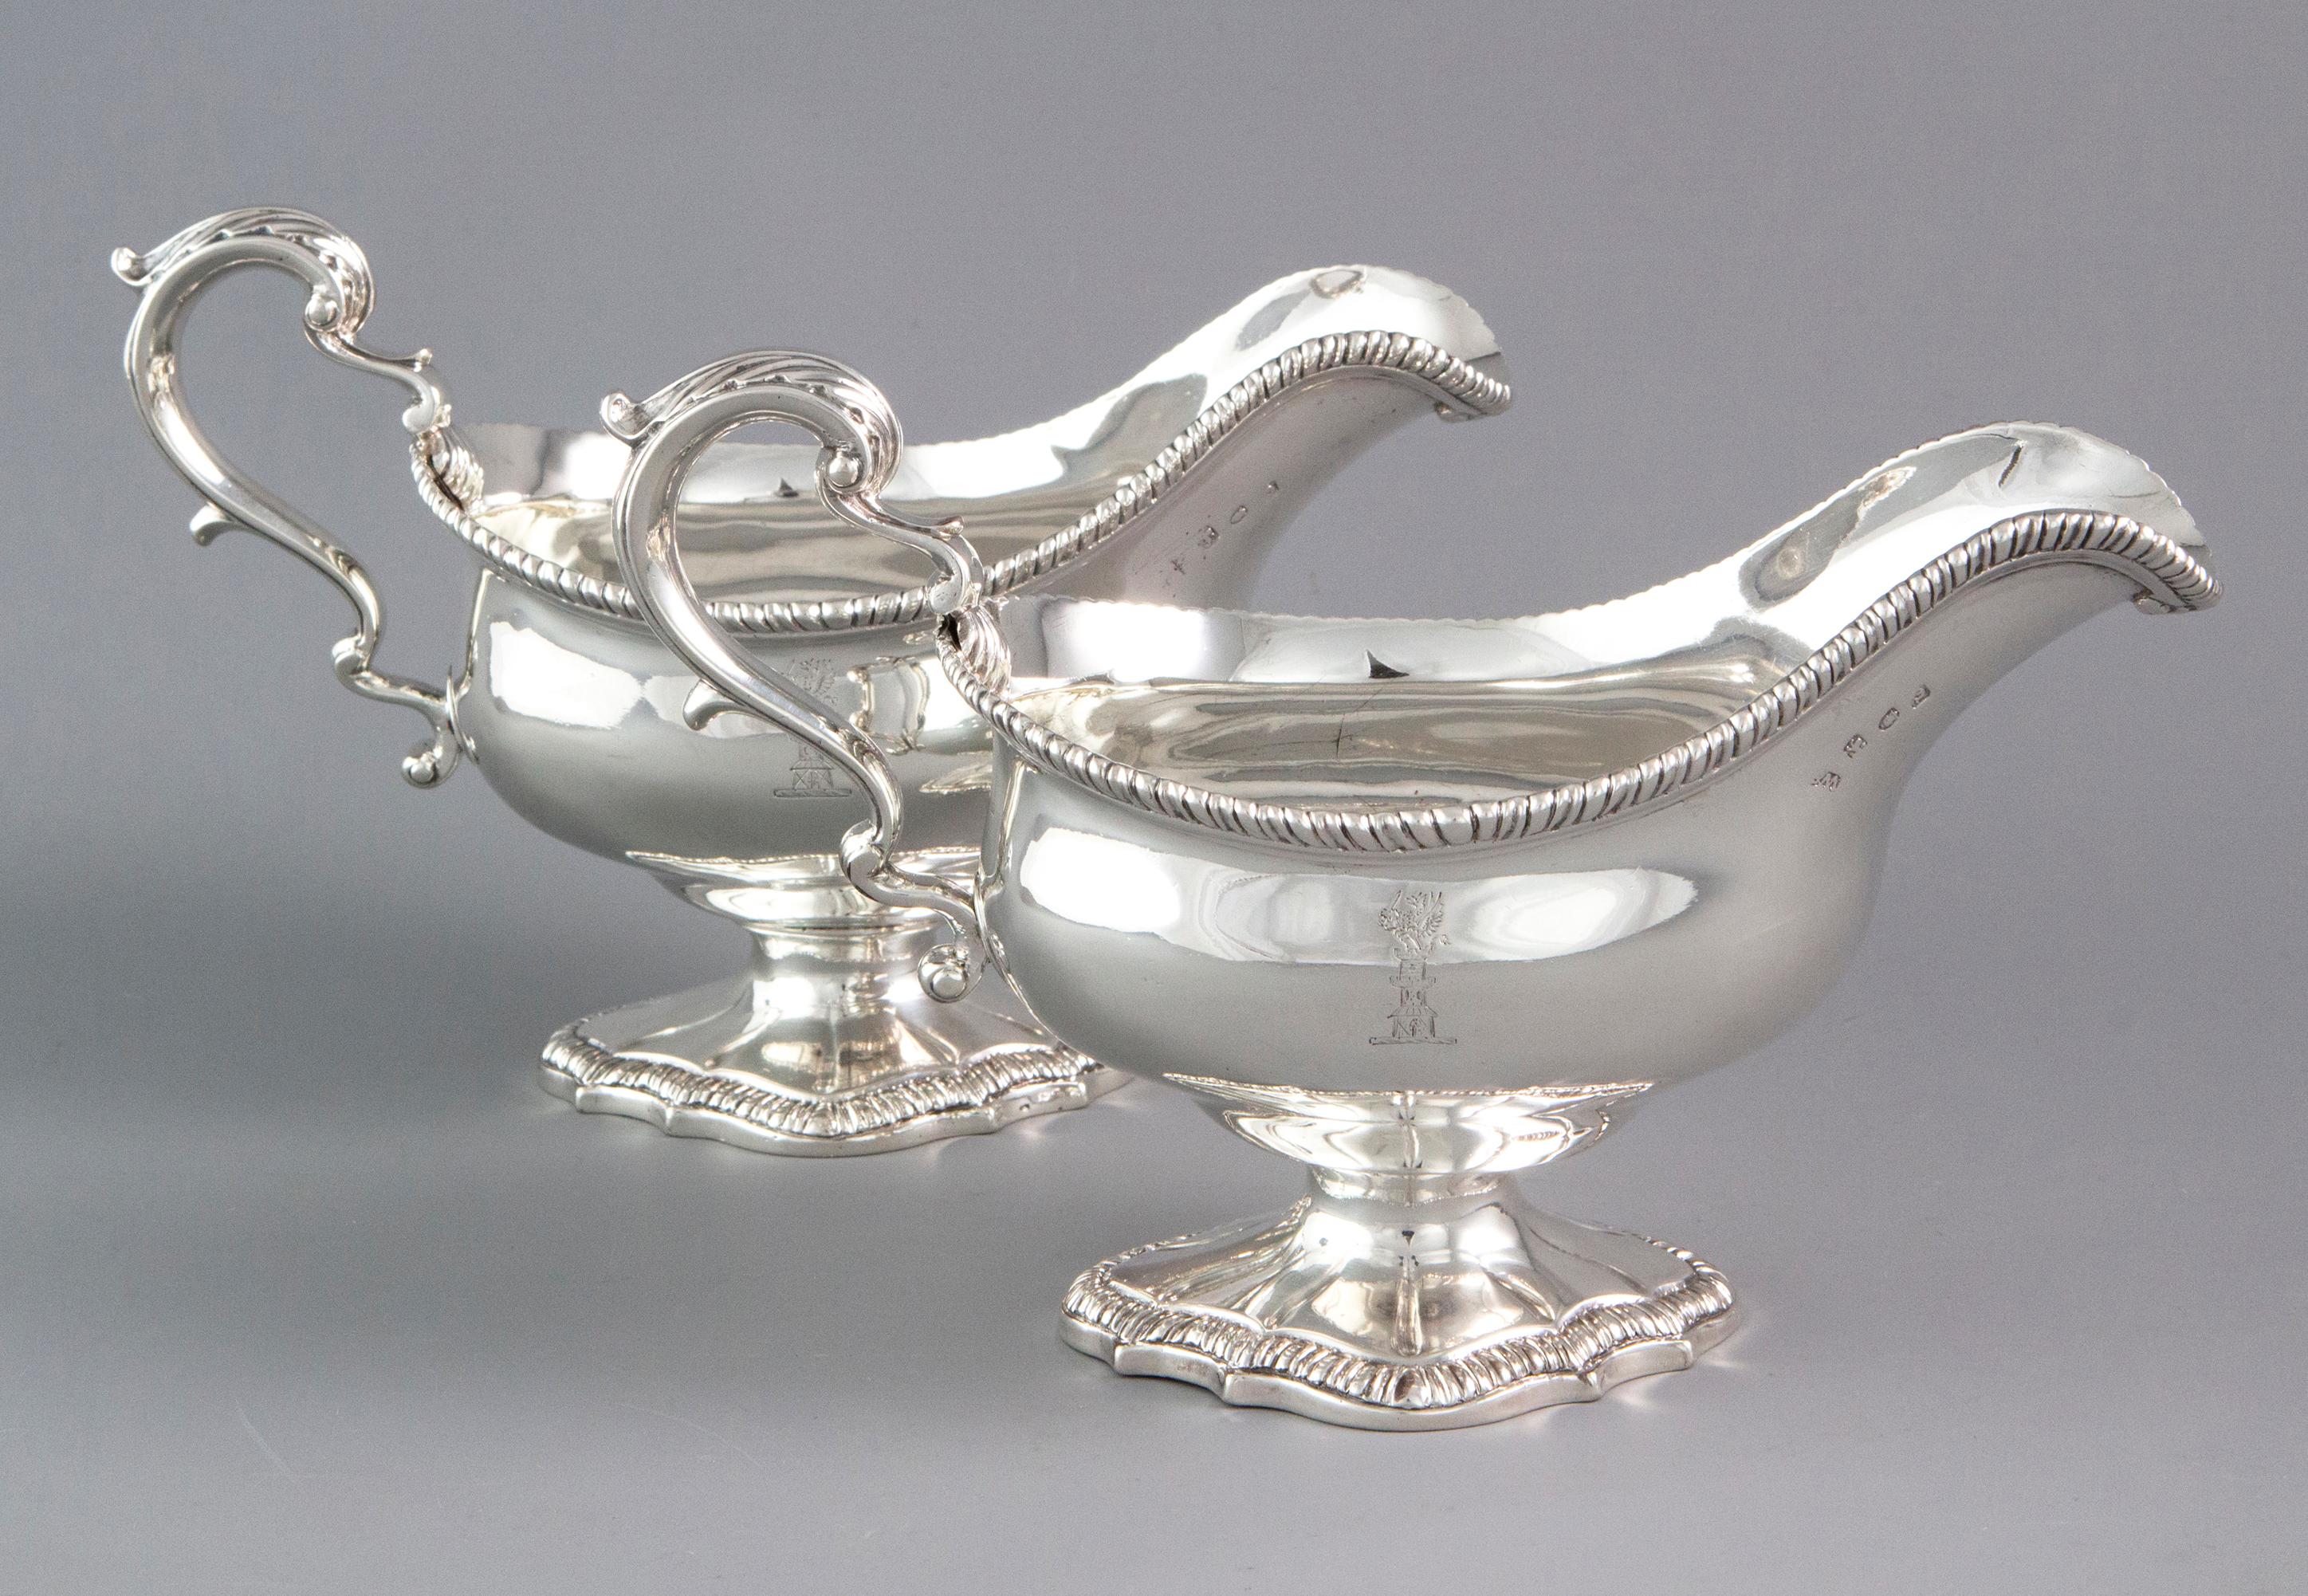 A very good pair of large size late 18th century silver sauce boats of typical form. With leaf capped scroll handles and gadrooned rims. Standing on a shaped pedestal foot with gadrooned edge. Both pieces are crested to one side with a dragon